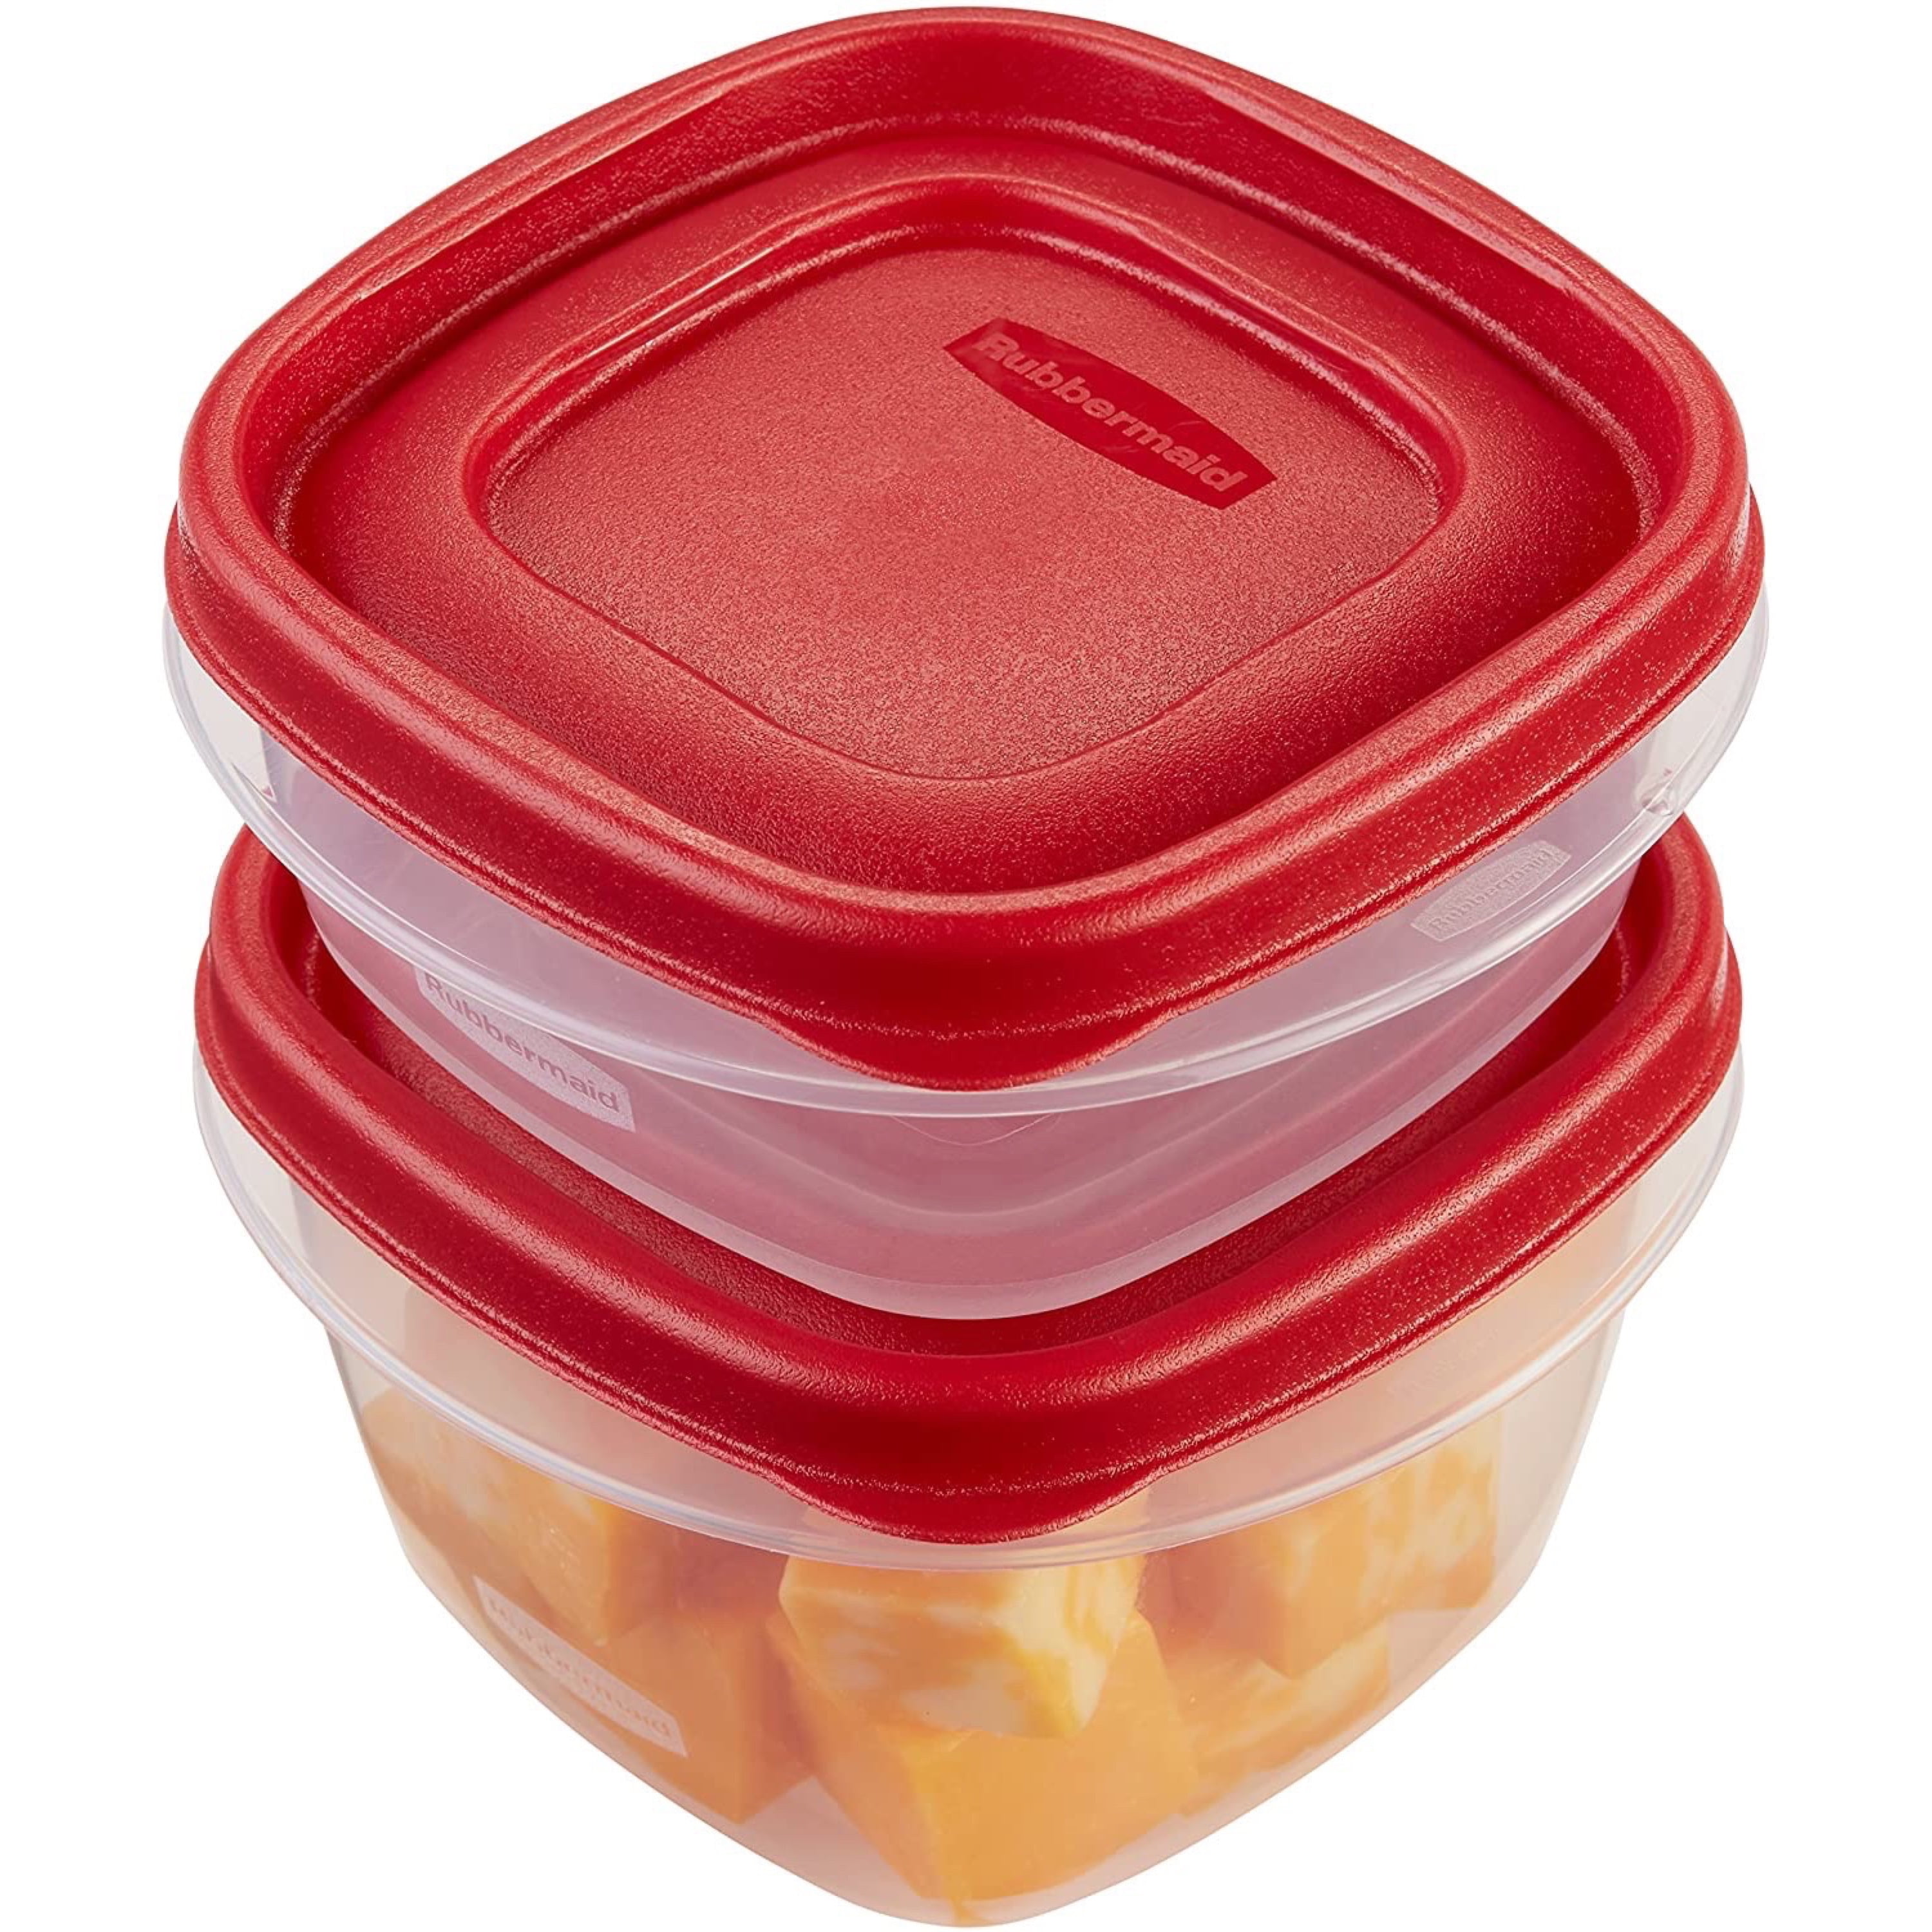 Rubbermaid® Easy Find Lids Clear/Red Food Storage Set, 12 pc - Fred Meyer